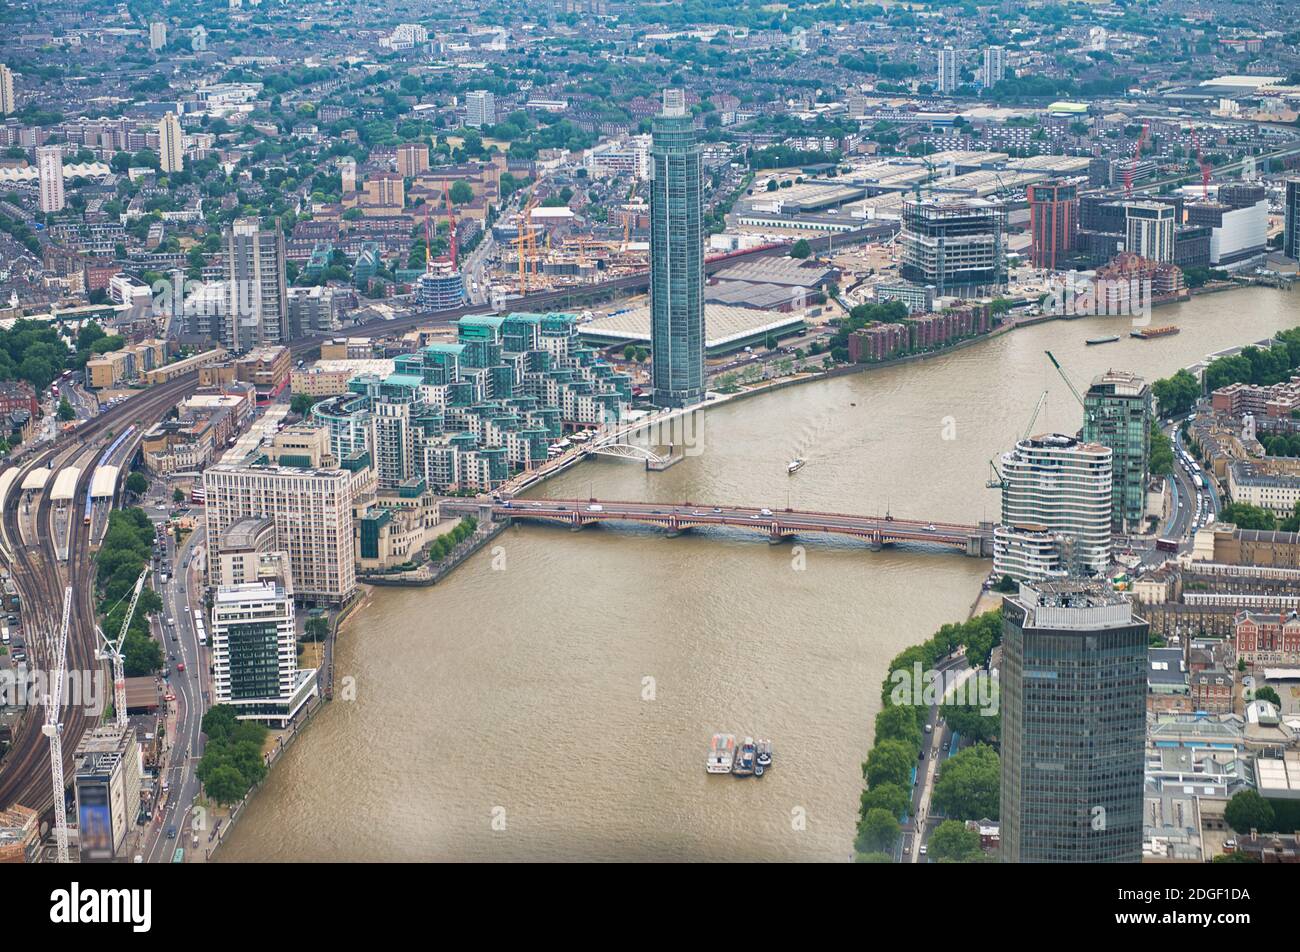 Aerial view of London skysline and River Thames as seen from helicopter Stock Photo